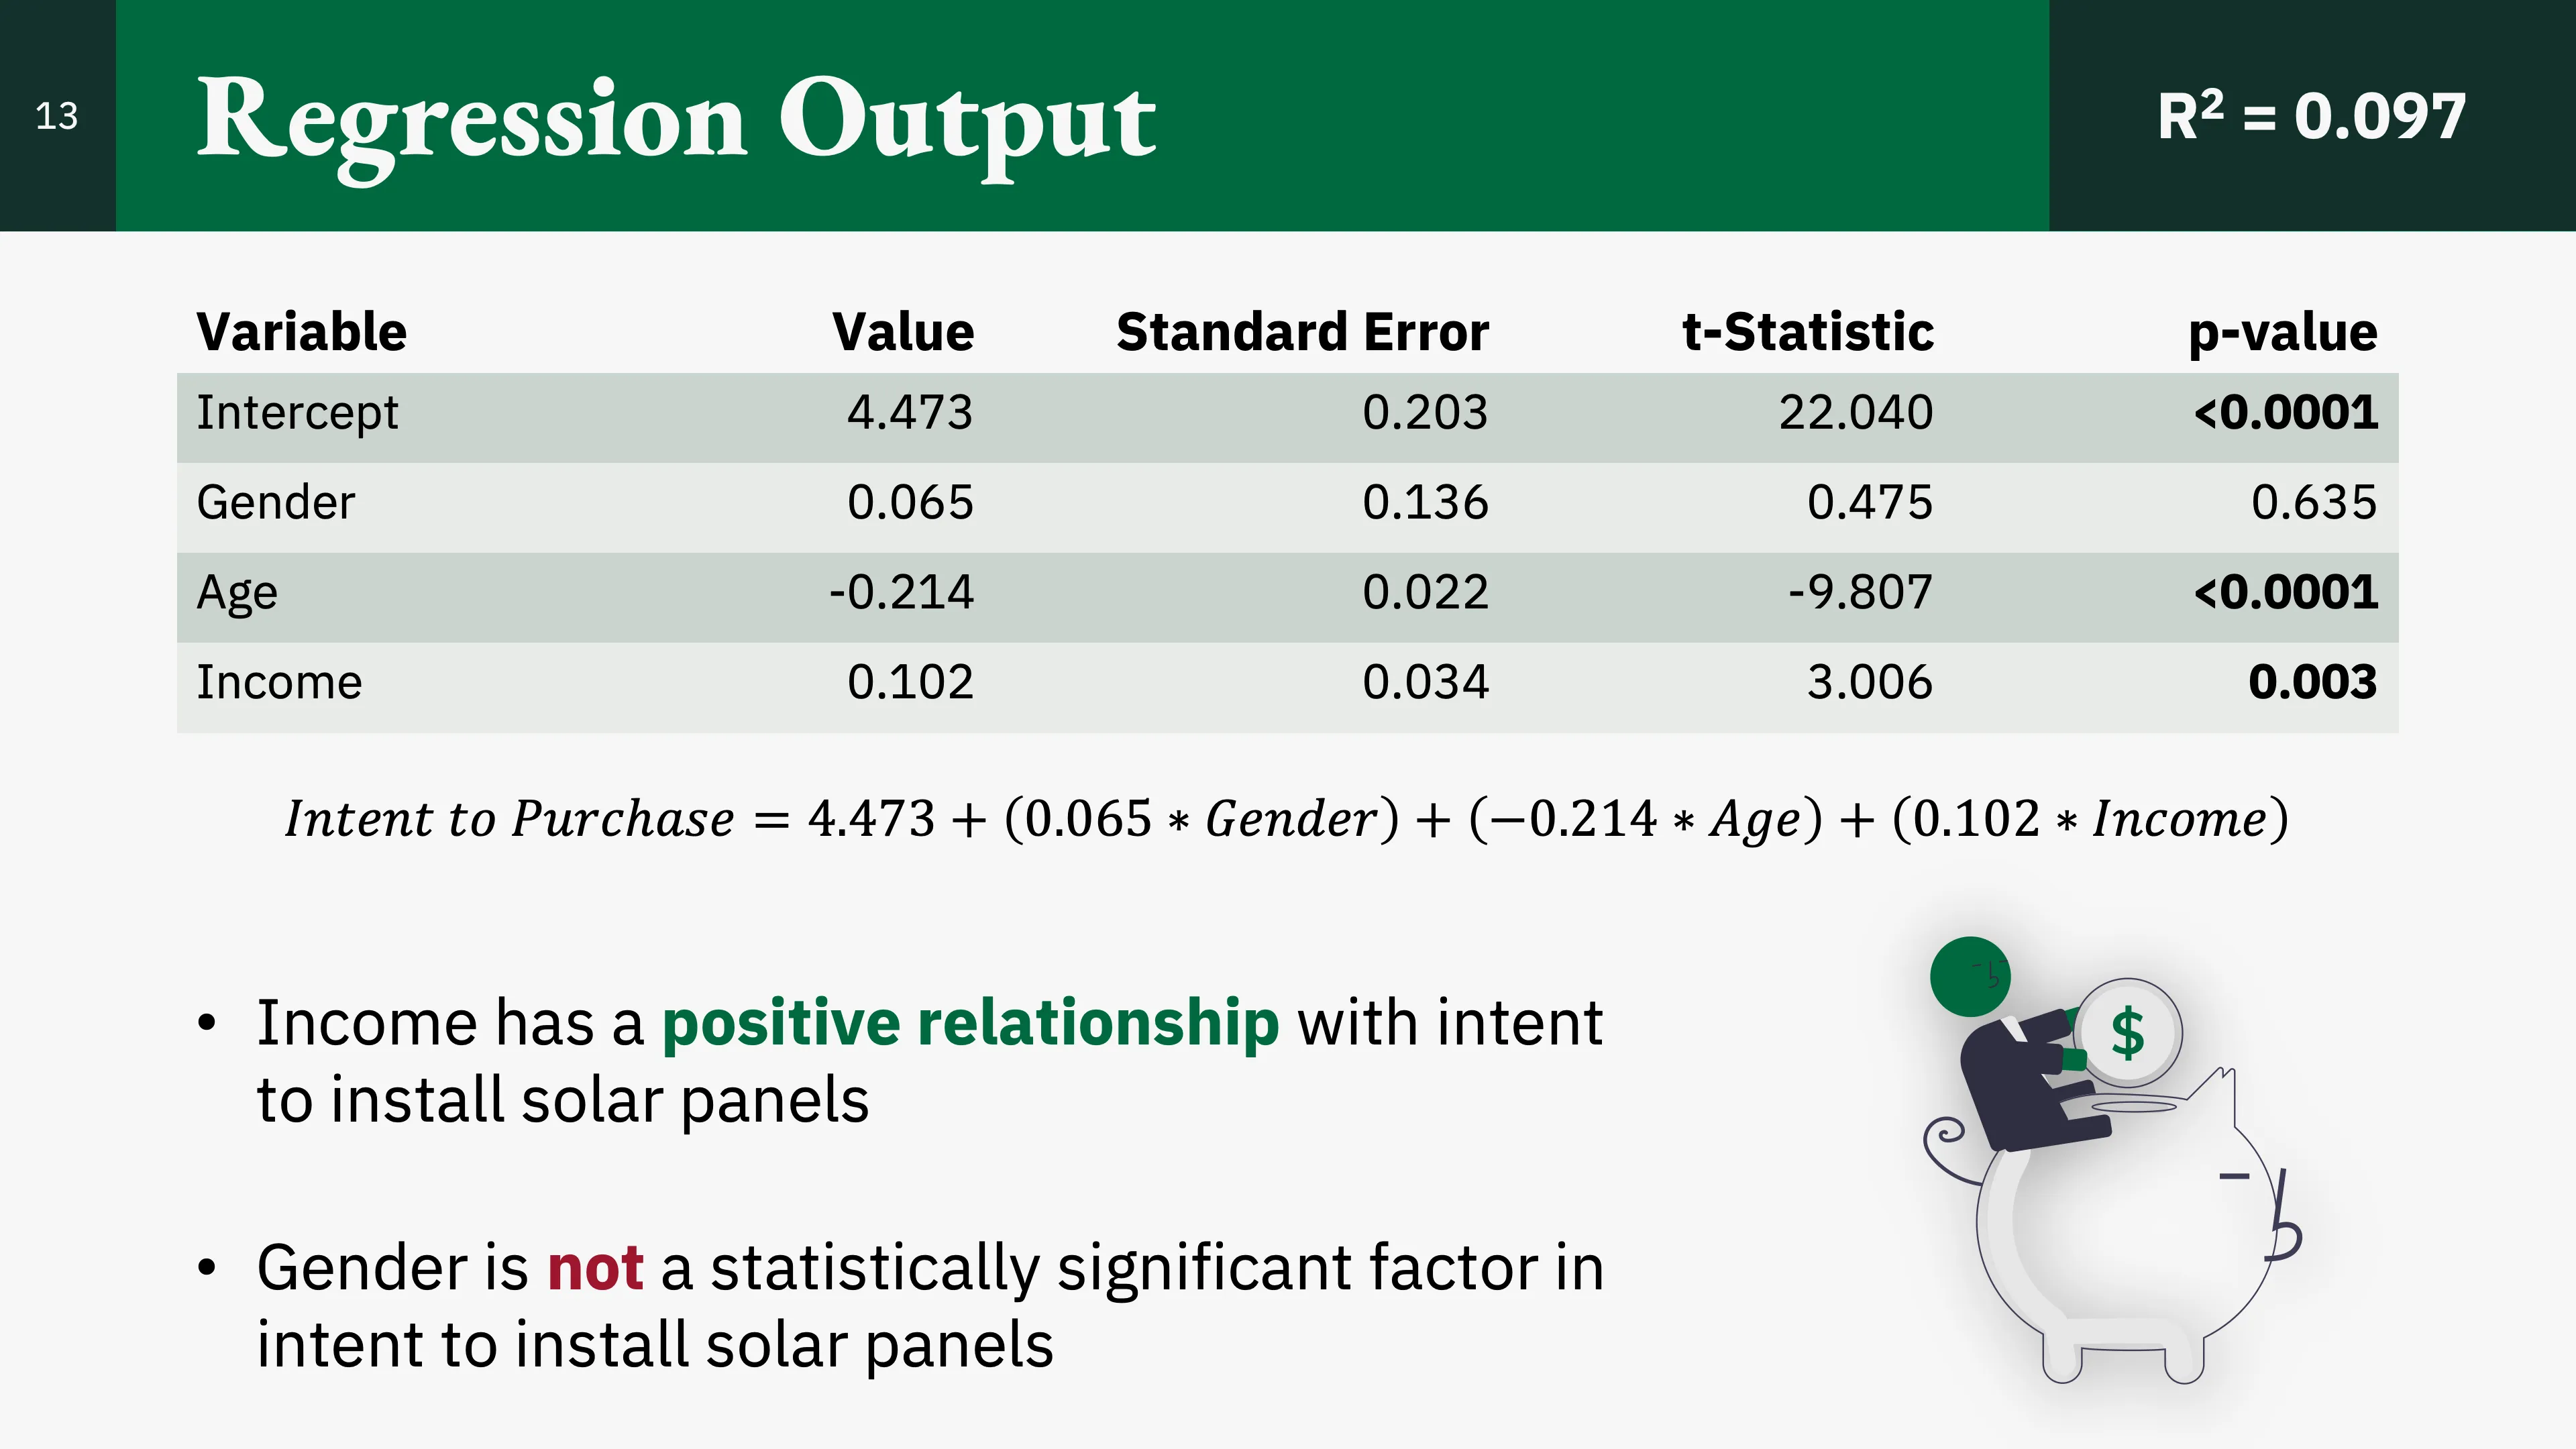 Slide 13, detailing the results of the linear regression model.